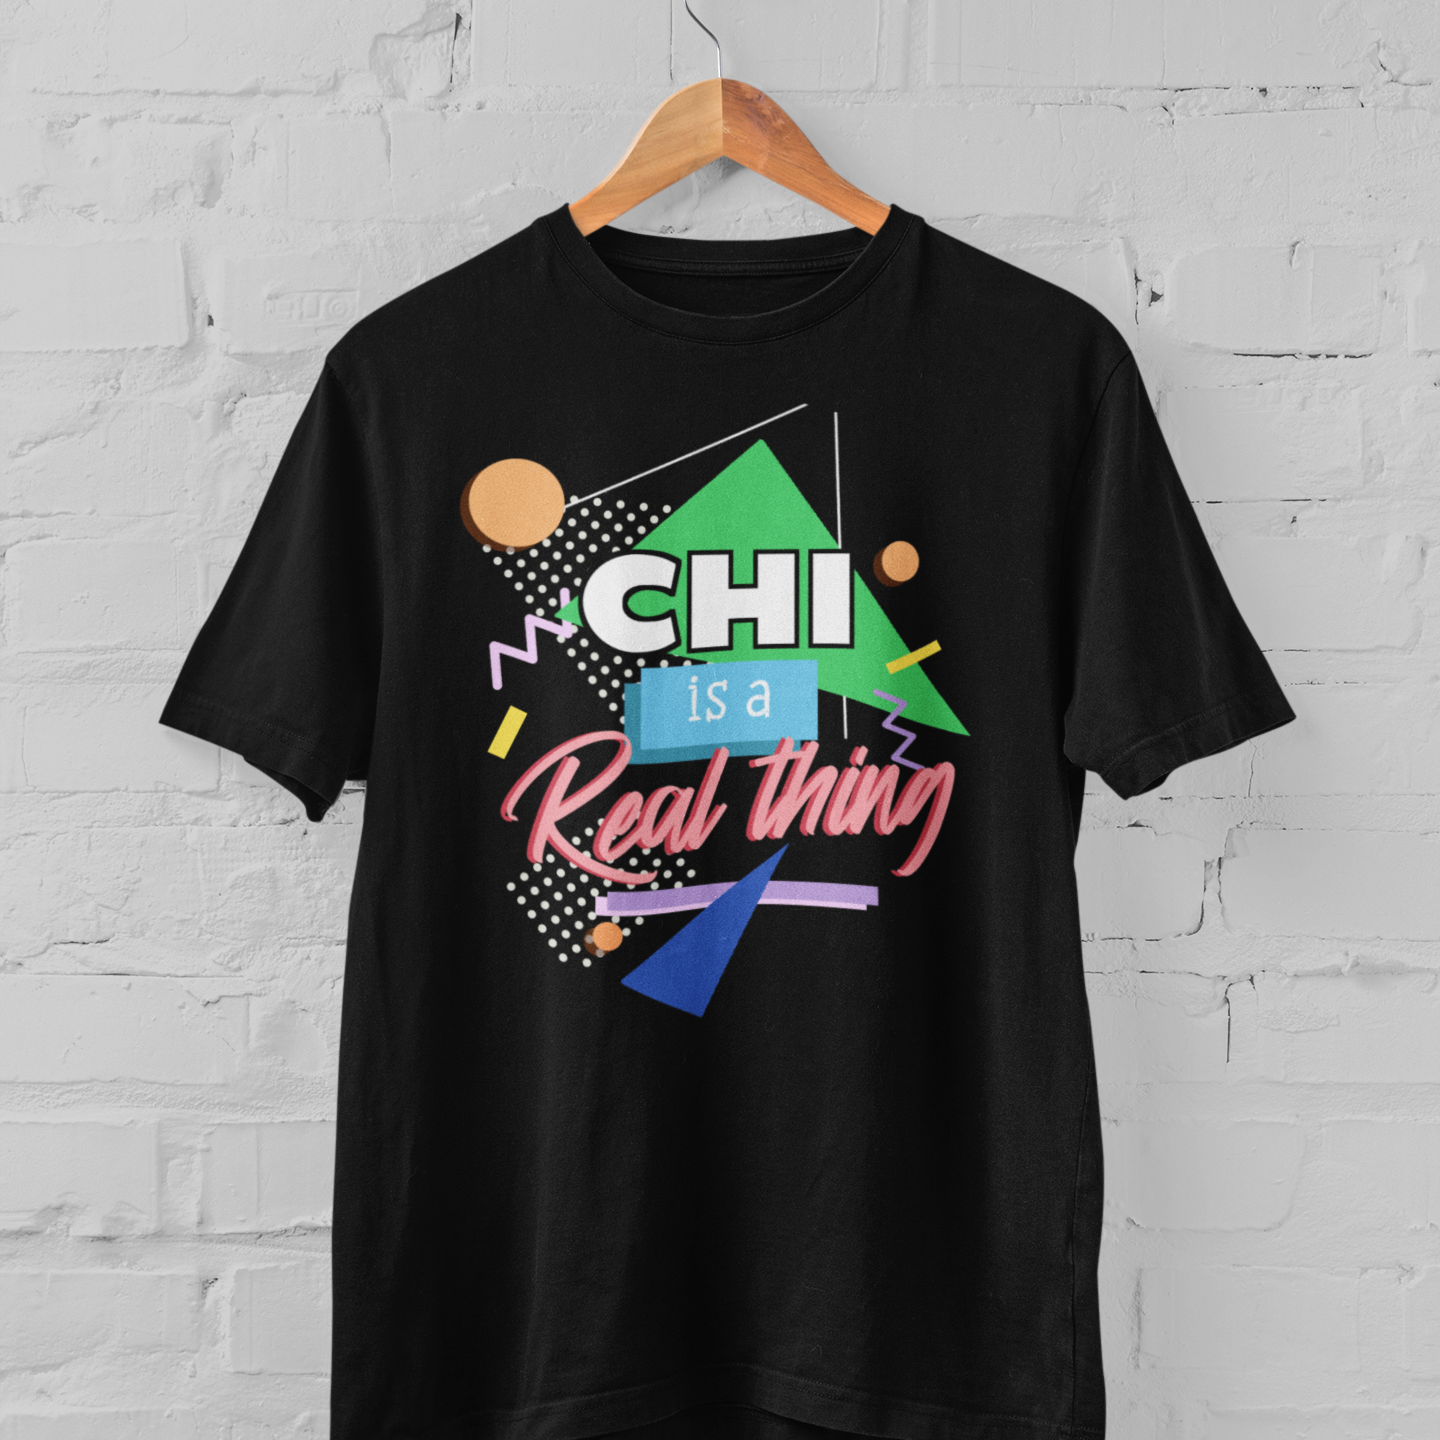 Black t-shirt 'Chi is a real thing' design